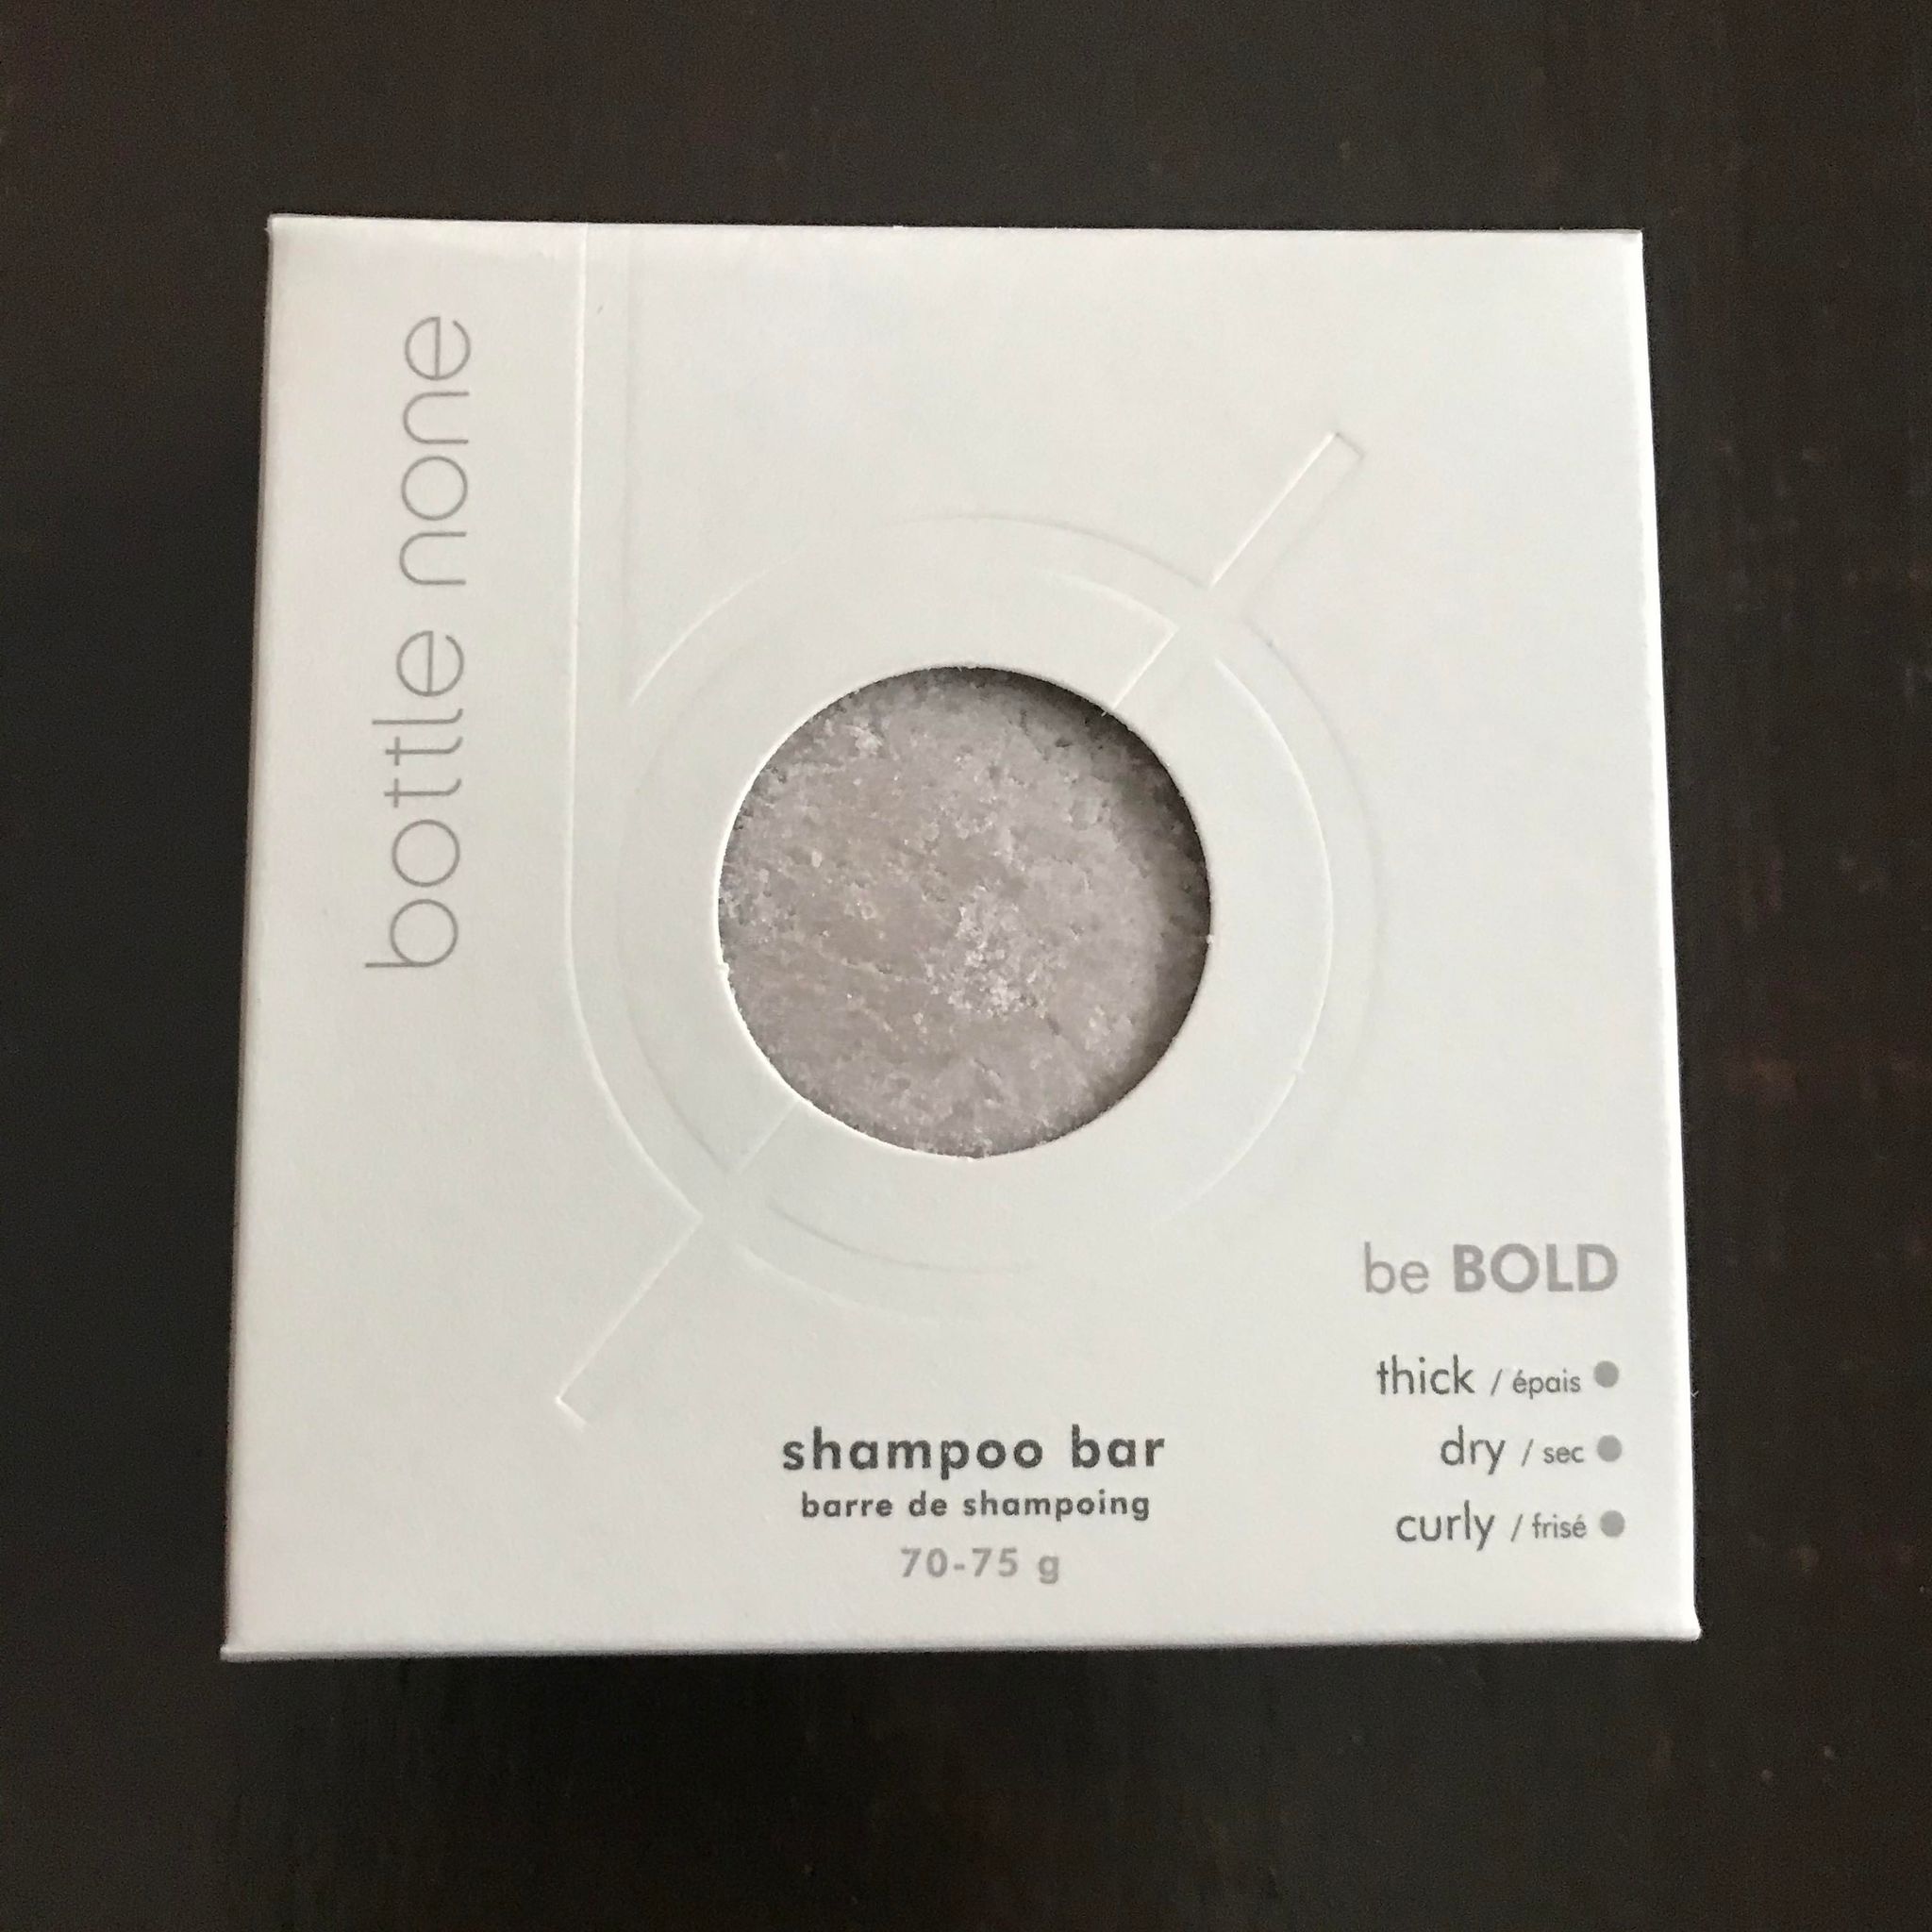 Be BOLD shampoo bar in a box for thick, dry, or curly hair made in Canada by Bottle None